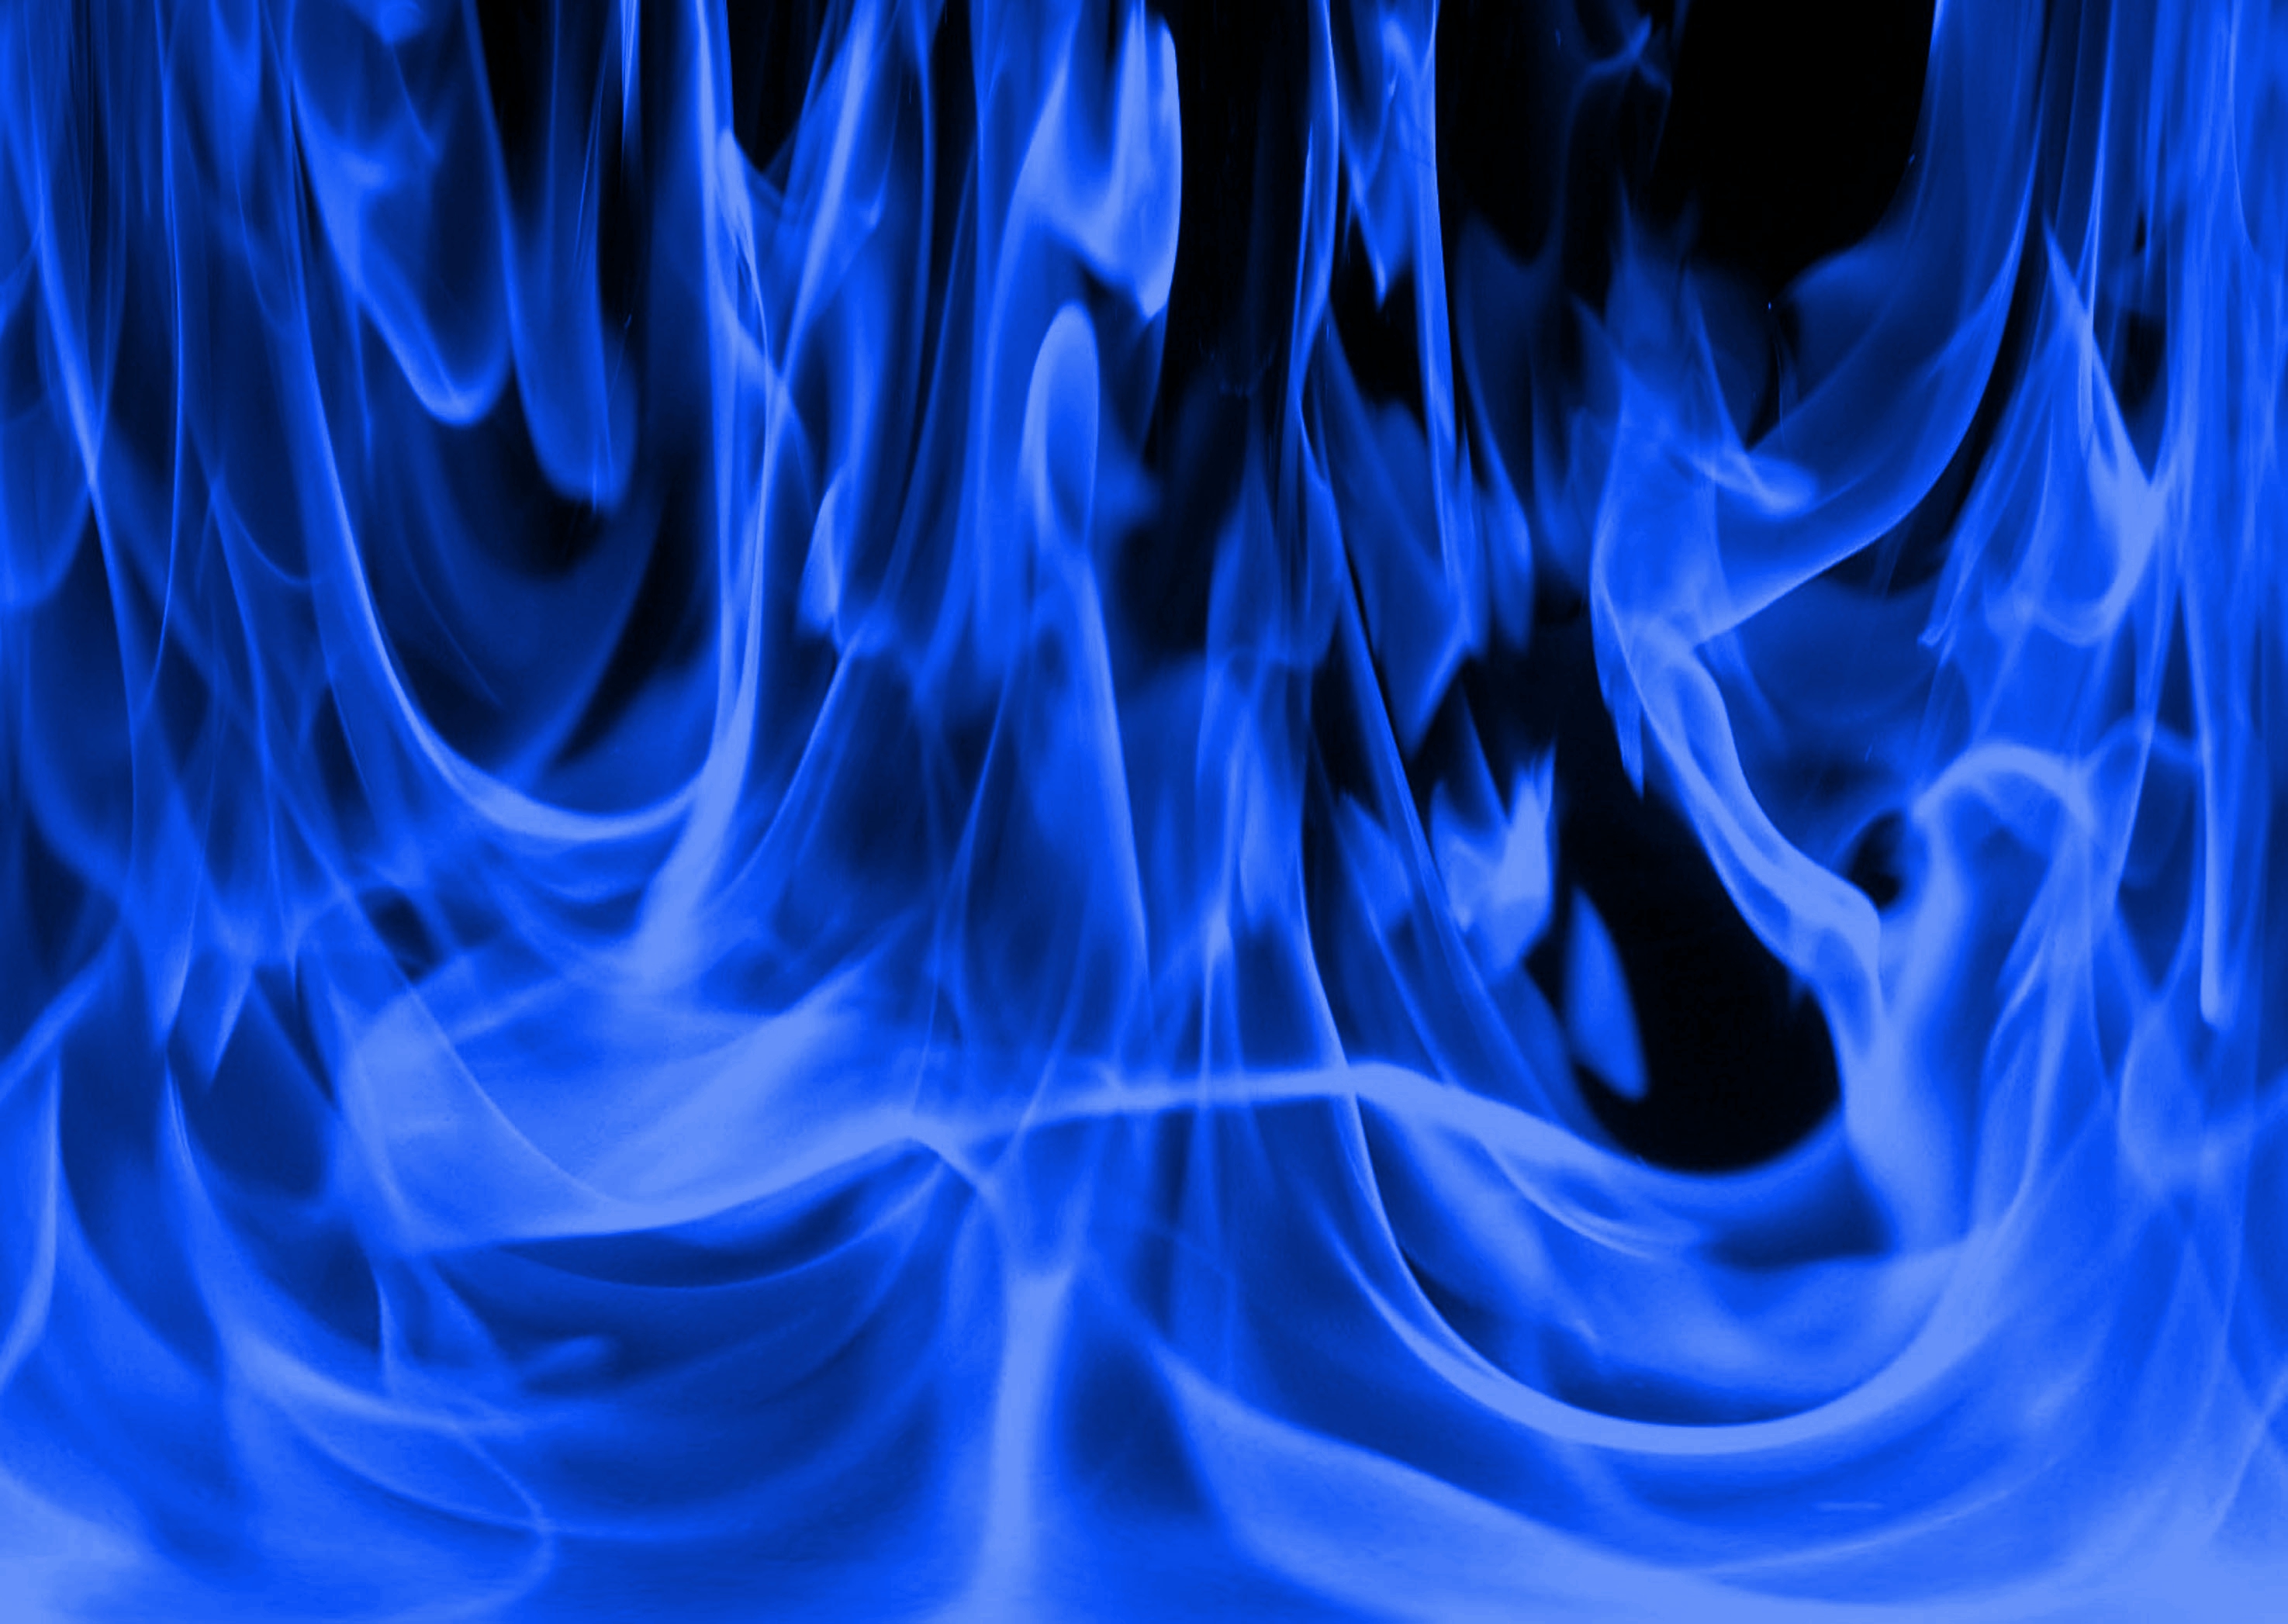 Blue and Red Fire Wallpaper wallpaper wallpaper hd background